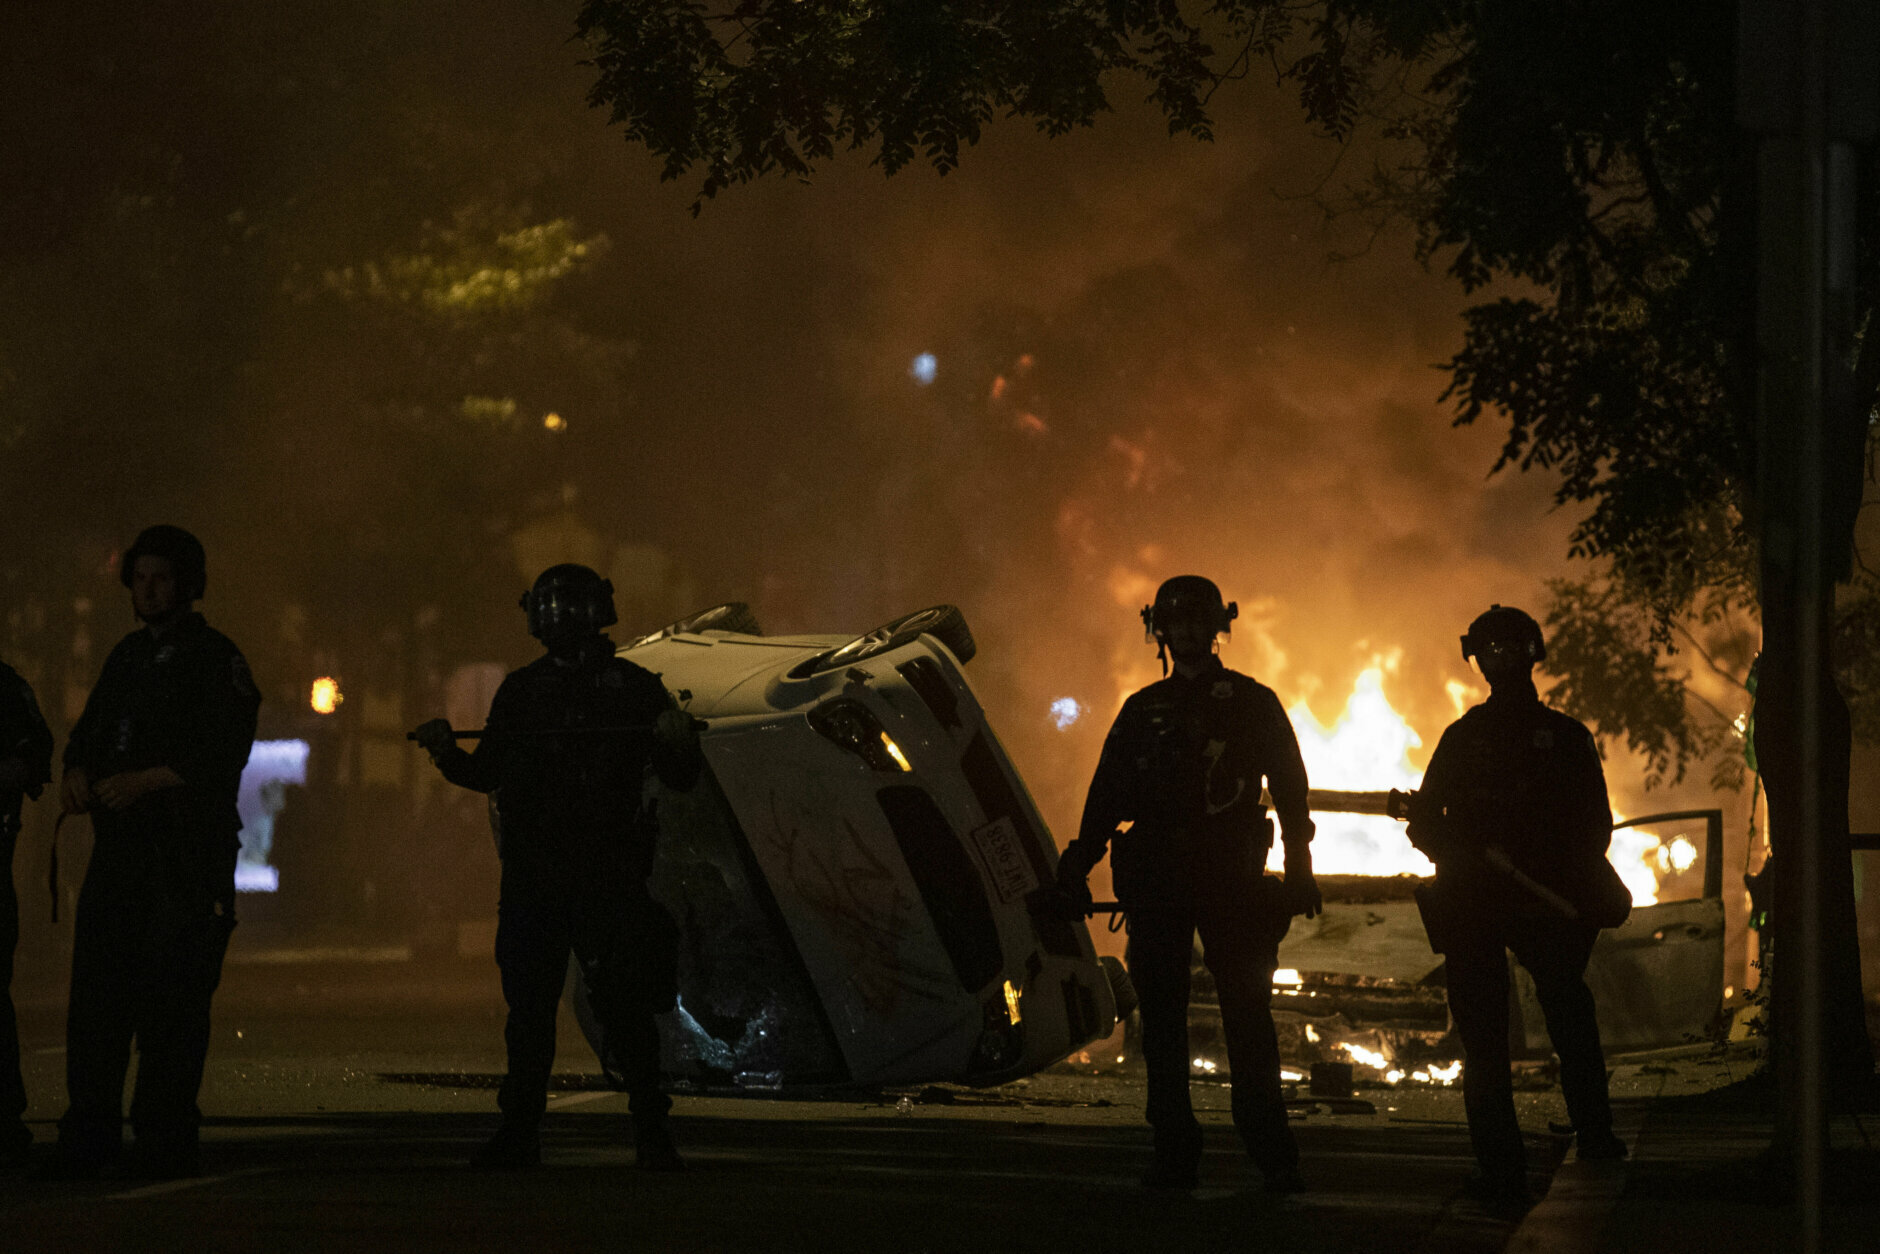 <p>Police stand near an overturned vehicle and a fire as demonstrators protest the death of George Floyd, Sunday, May 31, 2020, near the White House in Washington. Floyd died after being restrained by Minneapolis police officers (AP Photo/Alex Brandon)</p>
